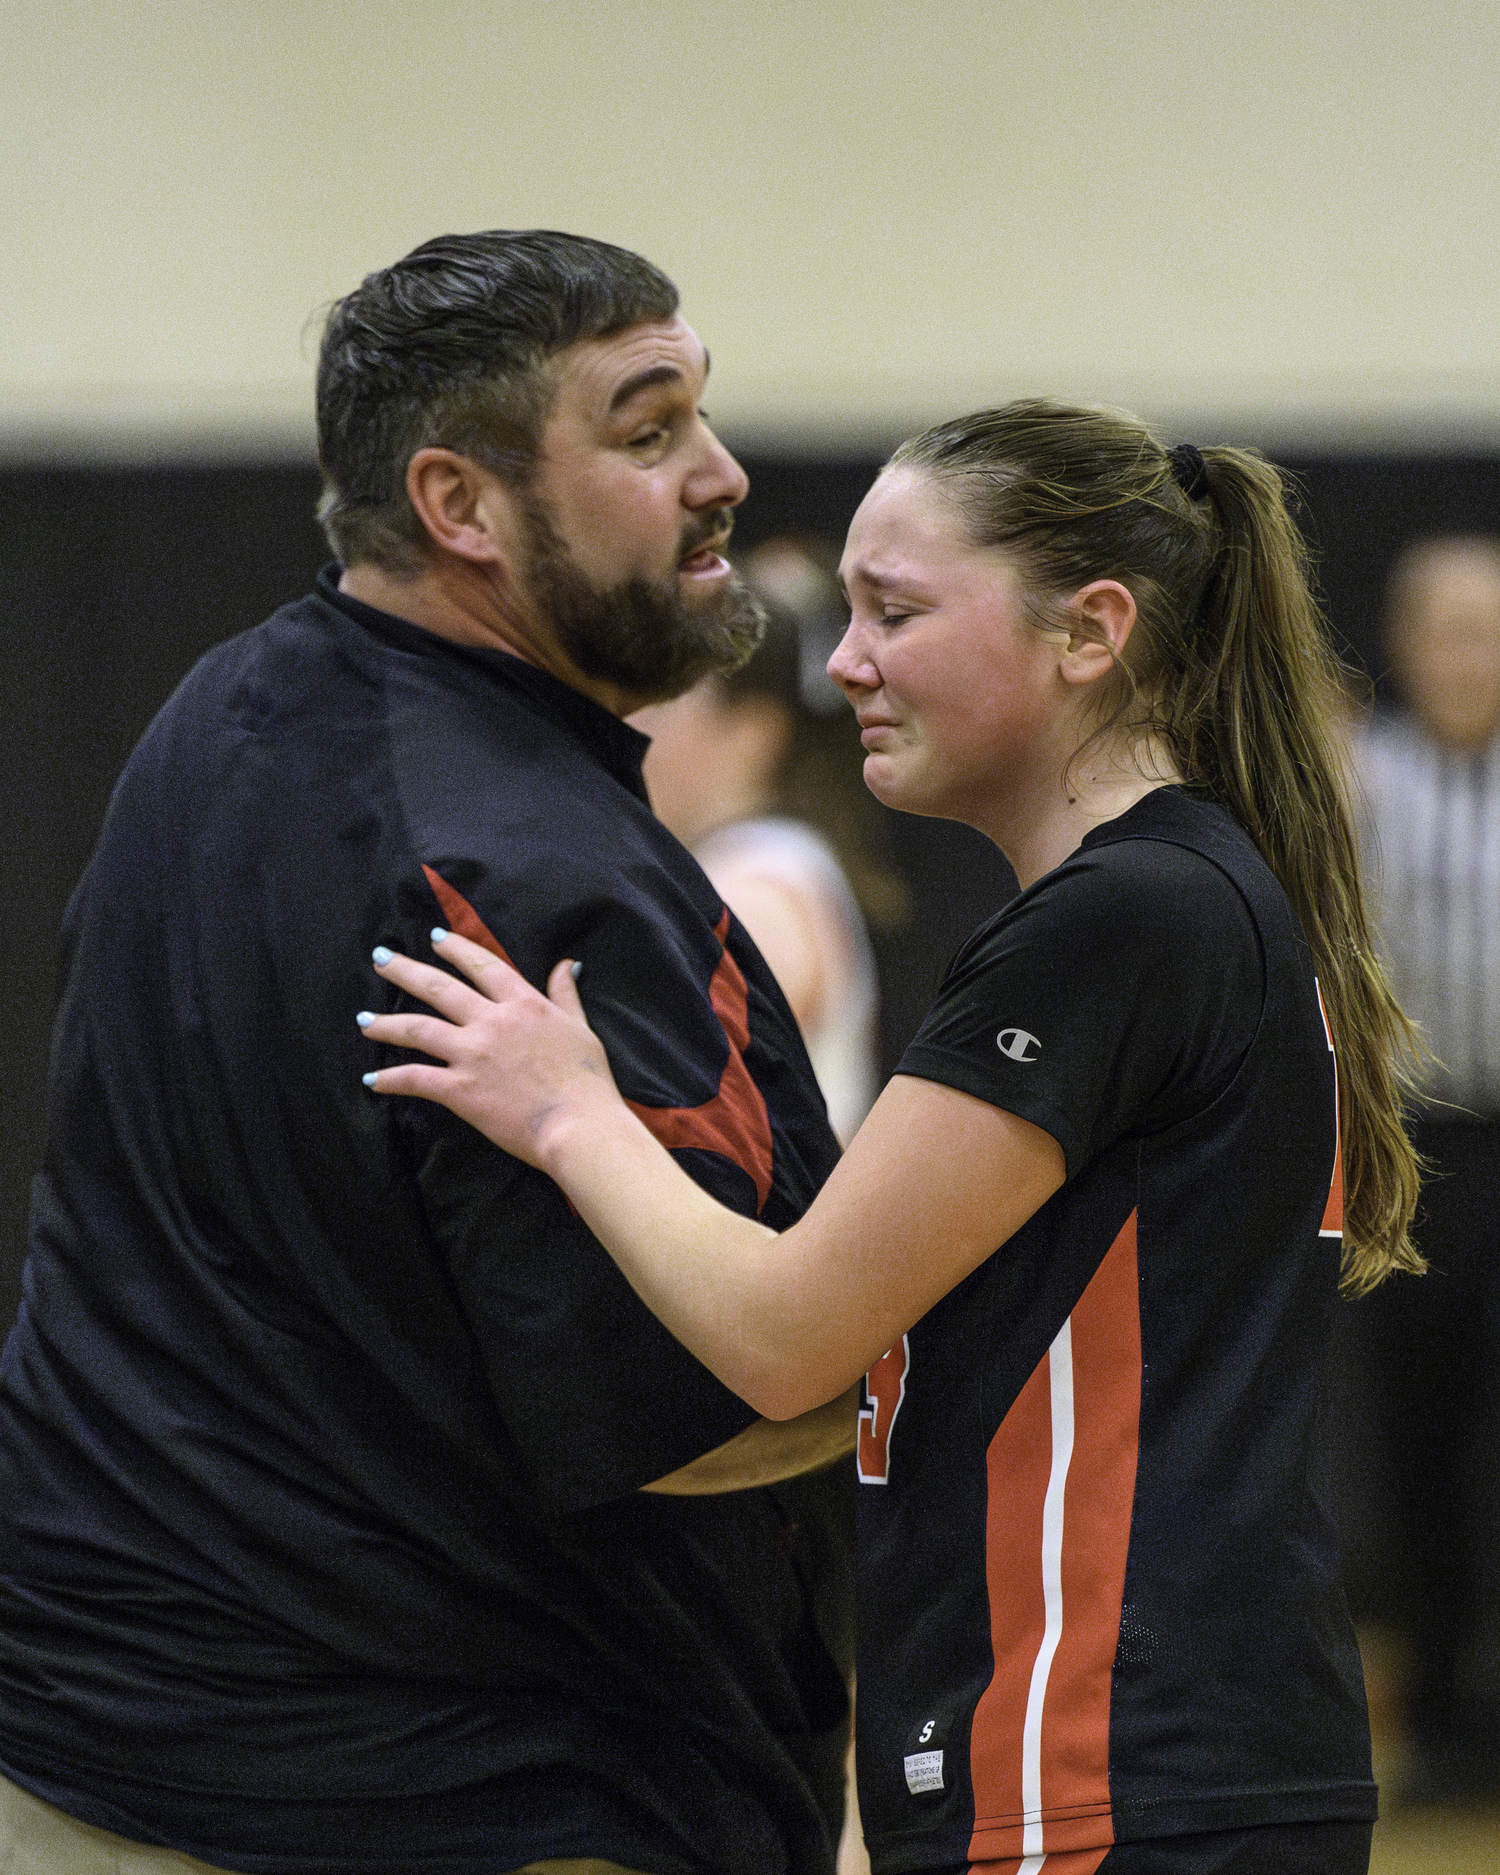 Whalers head coach Woody Kneeland consoles an emotional Cali Wilson toward the end of last week's playoff game in Babylon.   MARIANNE BARNETT